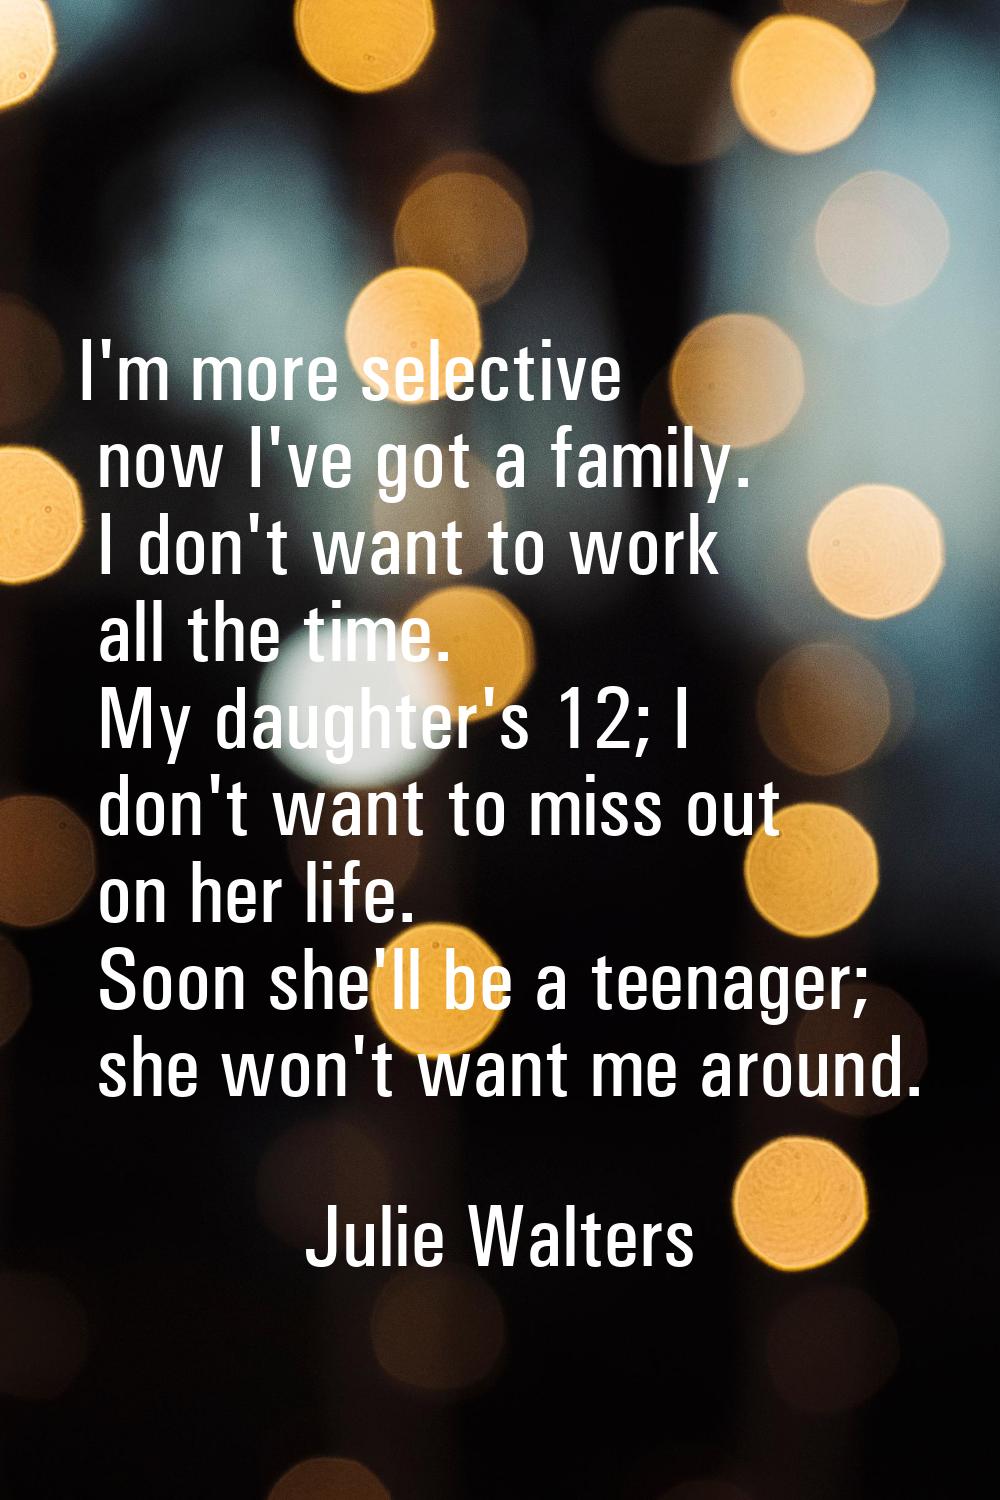 I'm more selective now I've got a family. I don't want to work all the time. My daughter's 12; I do